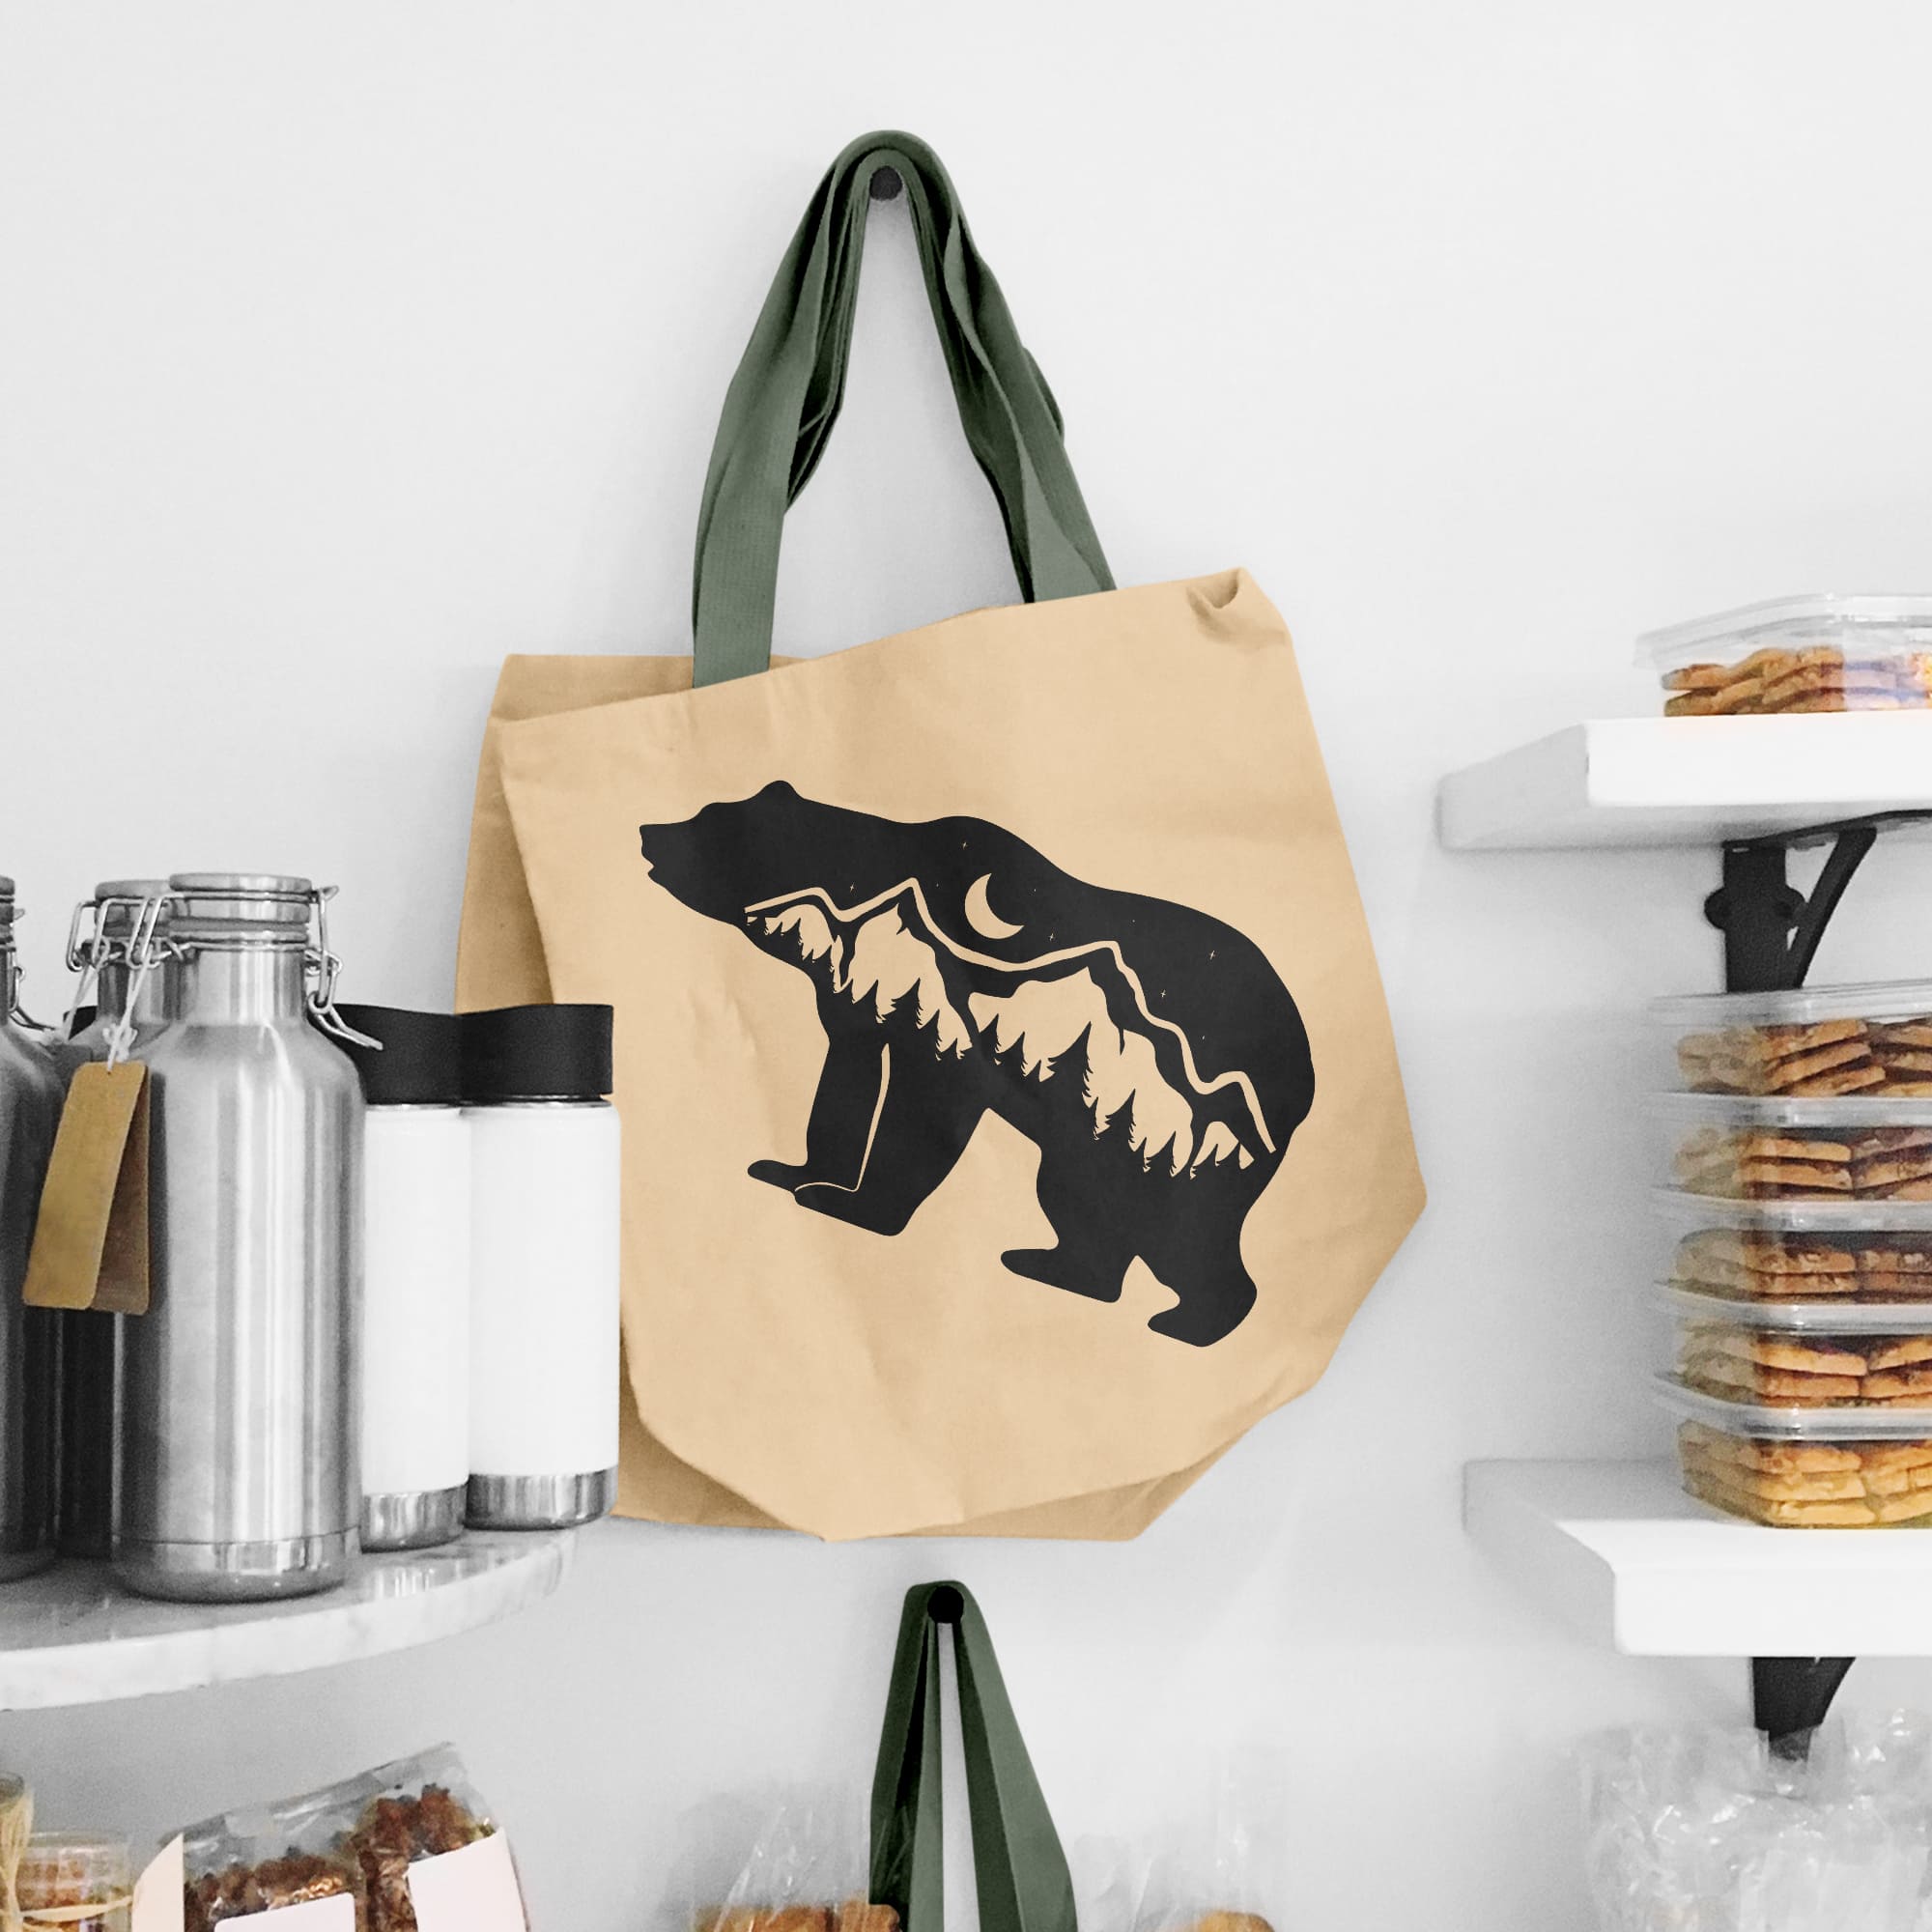 Brown paper bag with a bear on it.